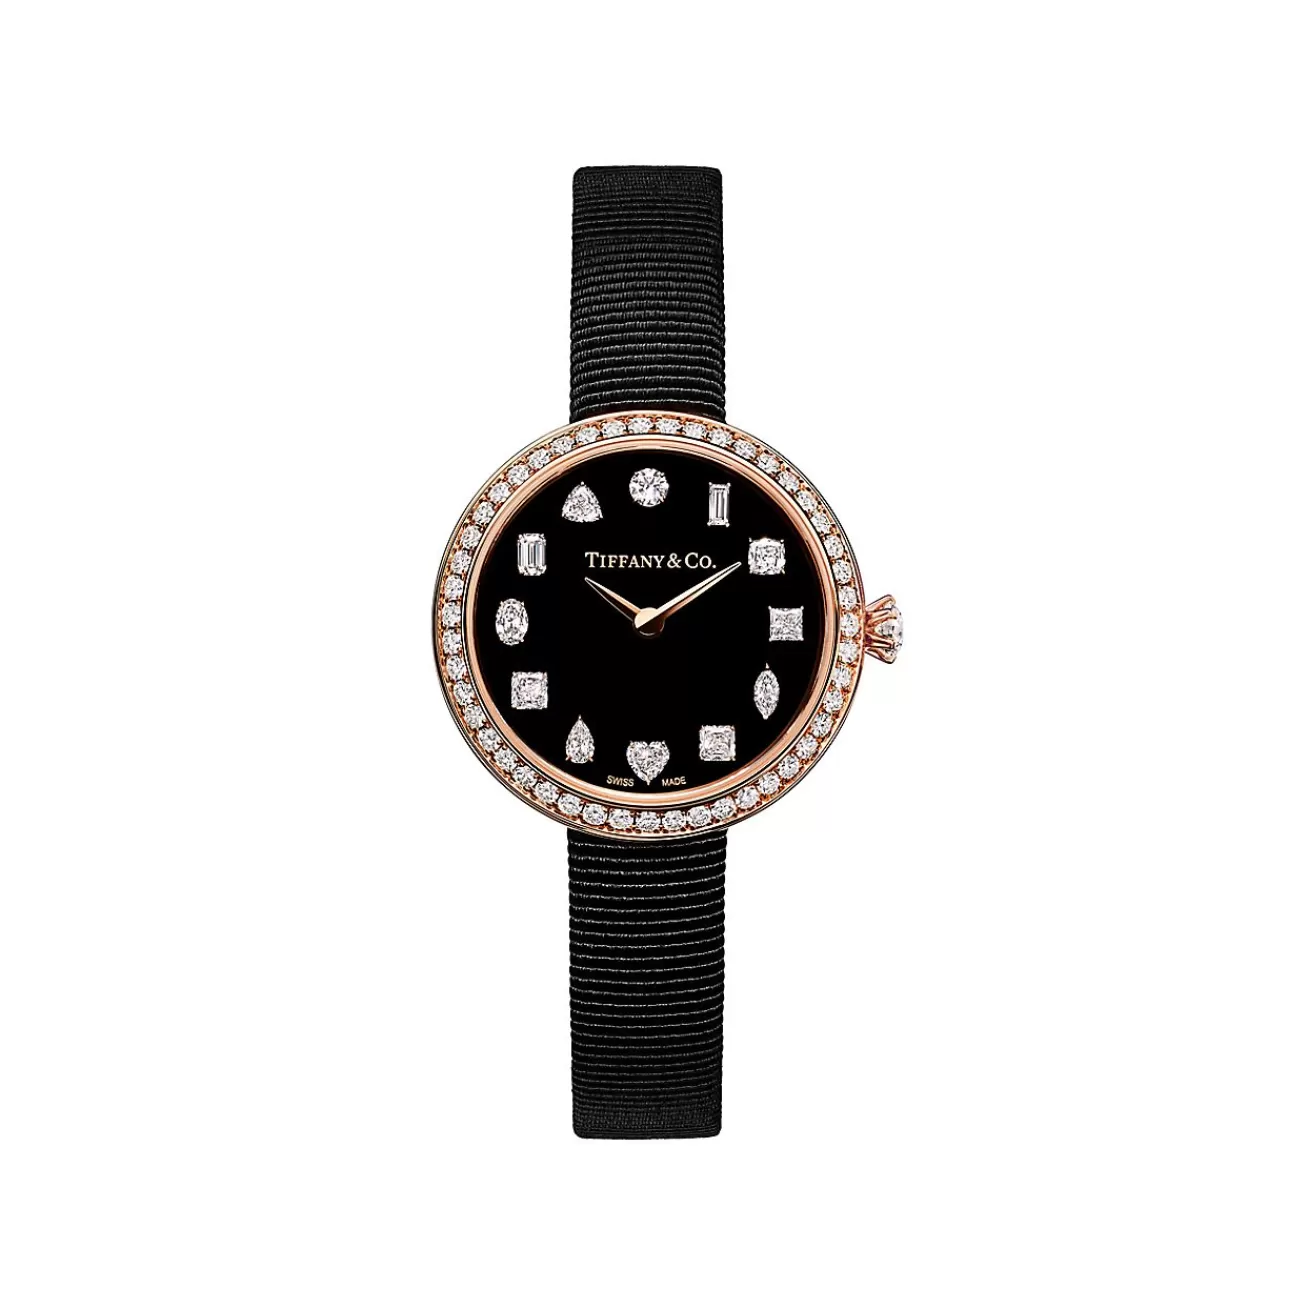 Tiffany & Co. Tiffany Eternity 28 mm Round Watch in Rose Gold with Diamonds | ^Women Fine Watches | Women’s Watches